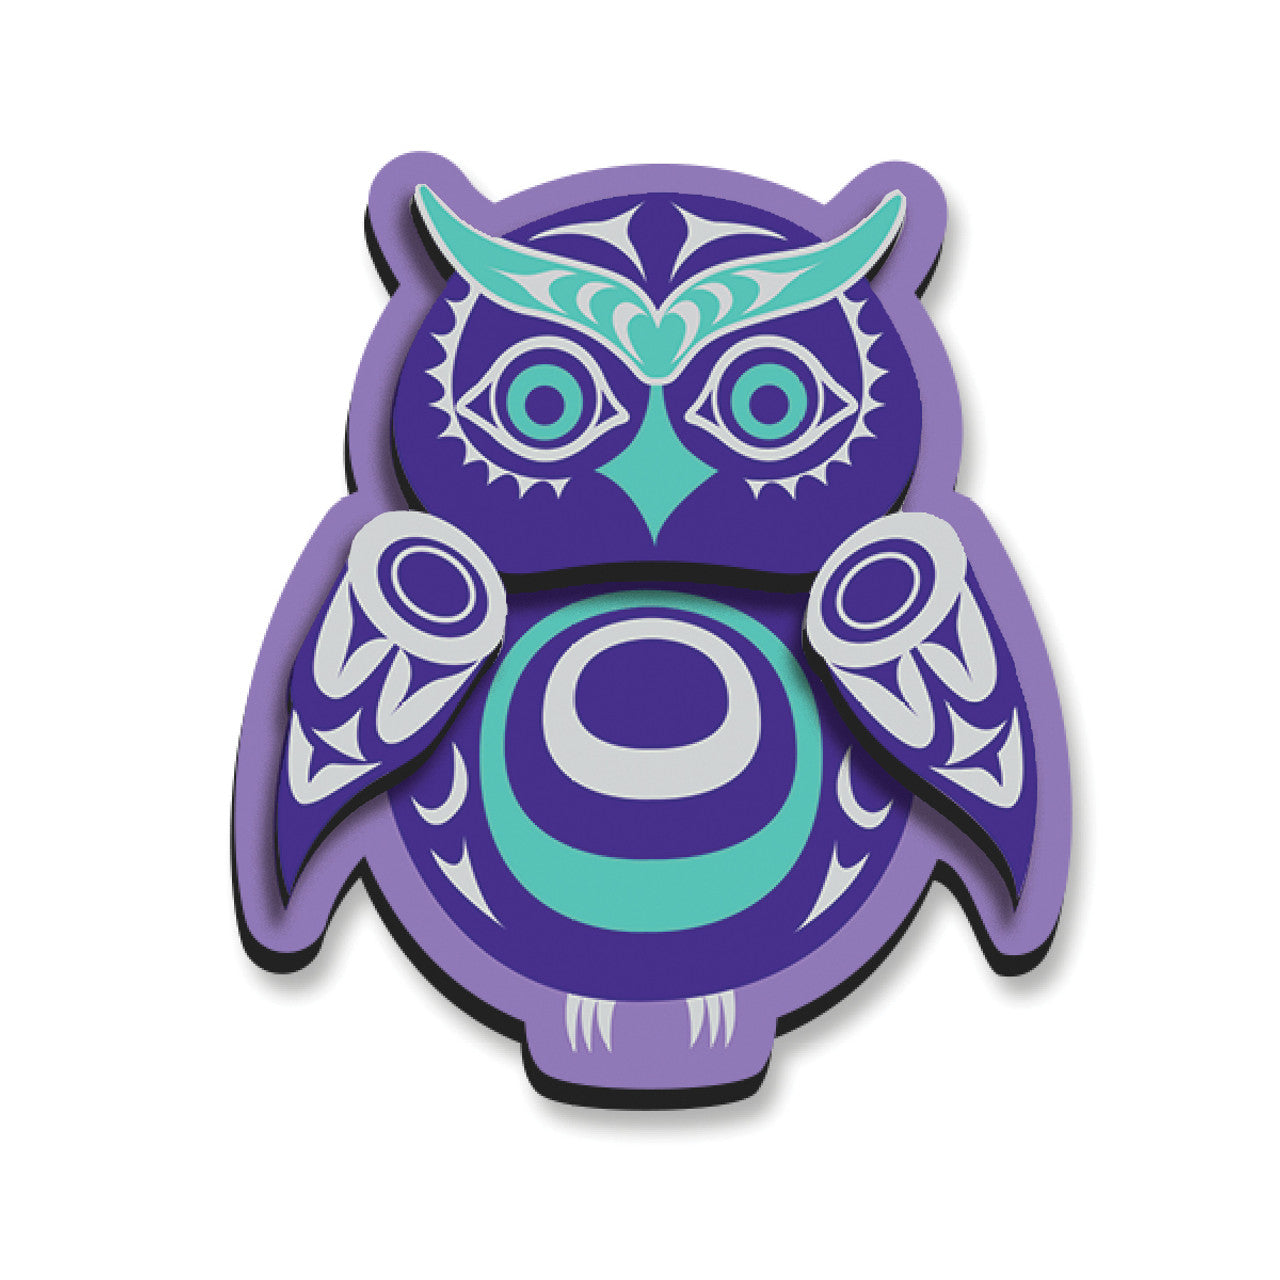 3D MAGNETS - Simone Diamond Owl - M376 - House of Himwitsa Native Art Gallery and Gifts